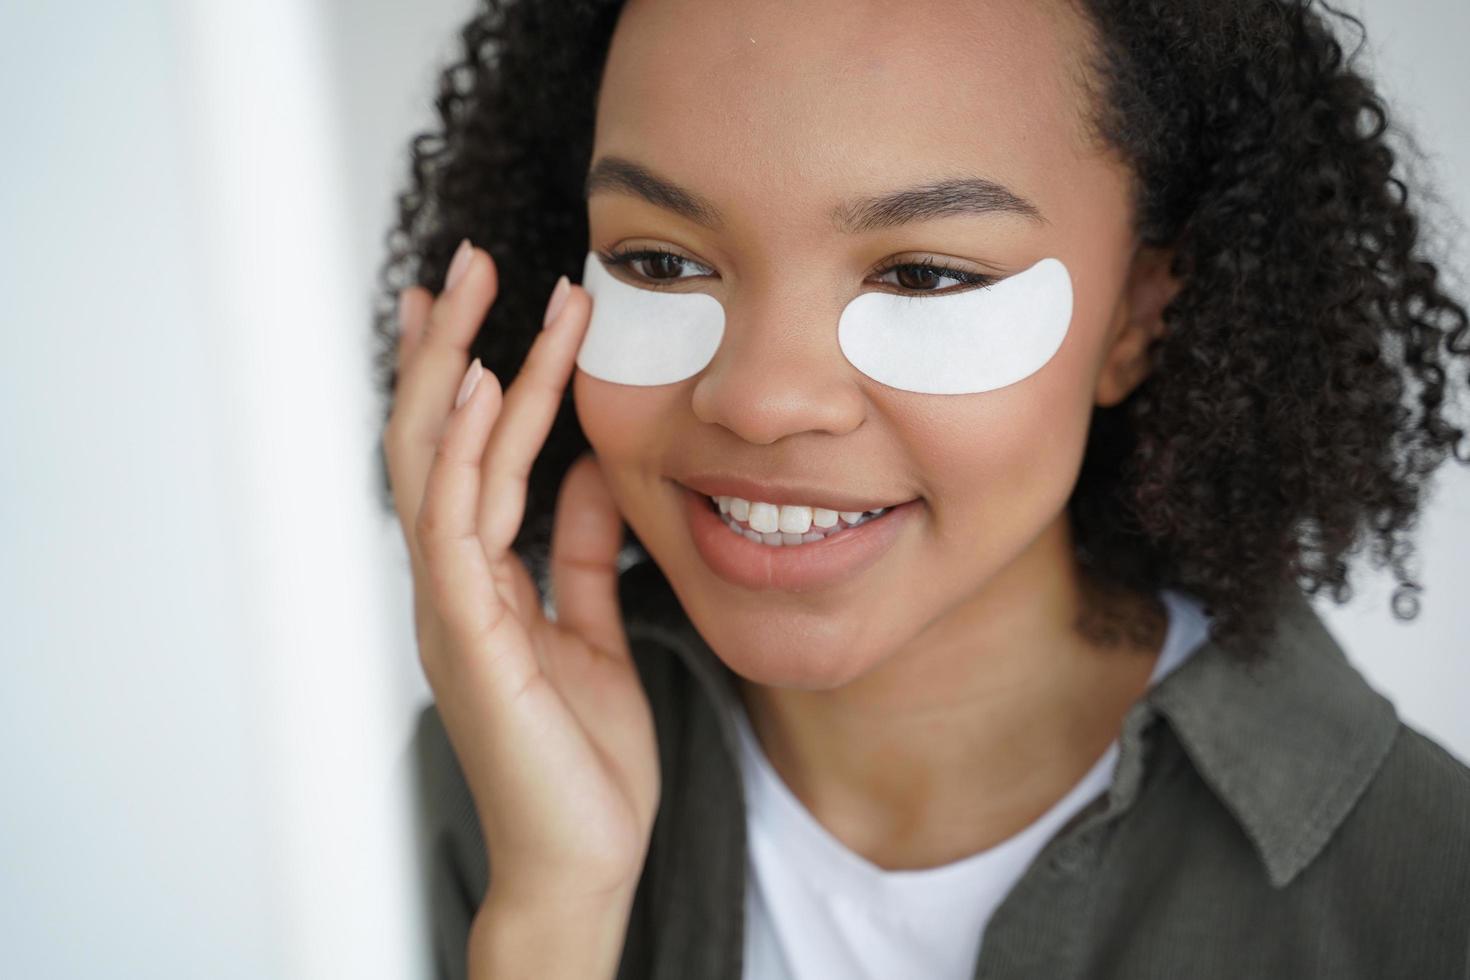 Young biracial girl applying under eye patches for healthy fresh face skin. Skincare, beauty routine photo